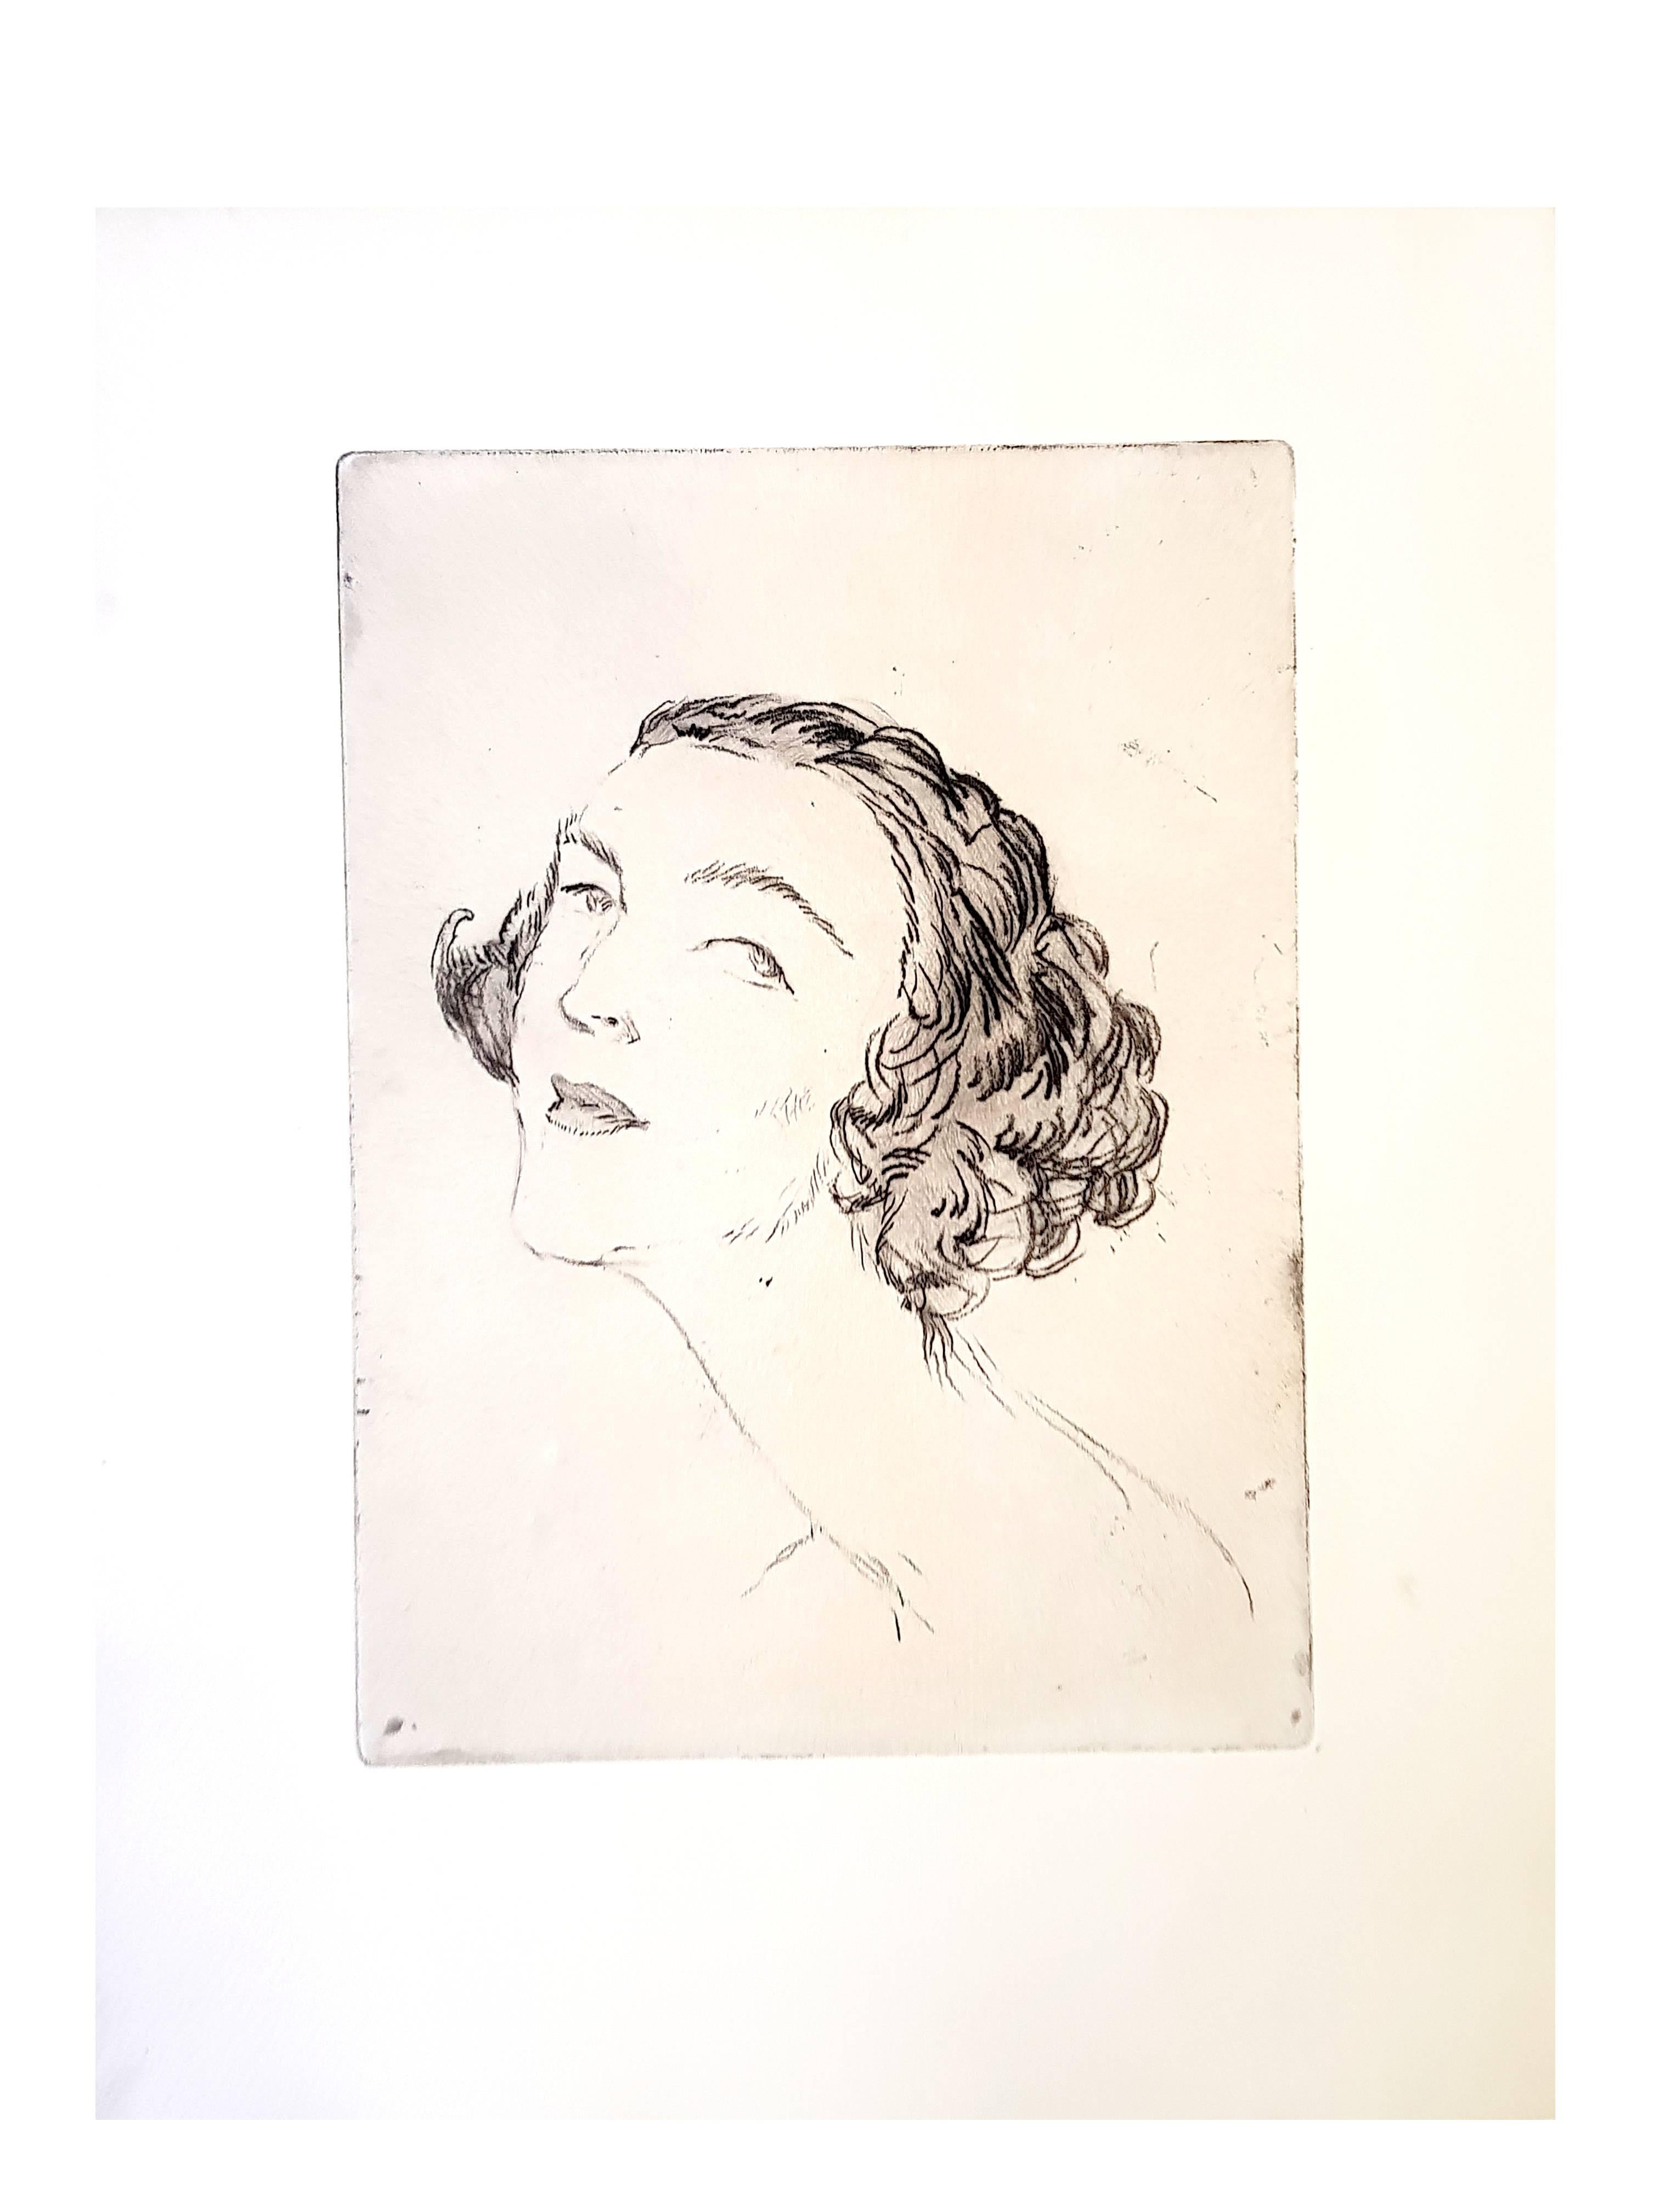 Original Etching by Jean-Gabriel Domergue
Dimensions: 33 x 25 cm
1924
Edition of 100
This artwork is part of the famous portfolio The Afternoon of a Faun.

Jean-Gabriel Domergue

Jean-Gabriel Domergue was born in Bordeaux in 1889. As a talented and